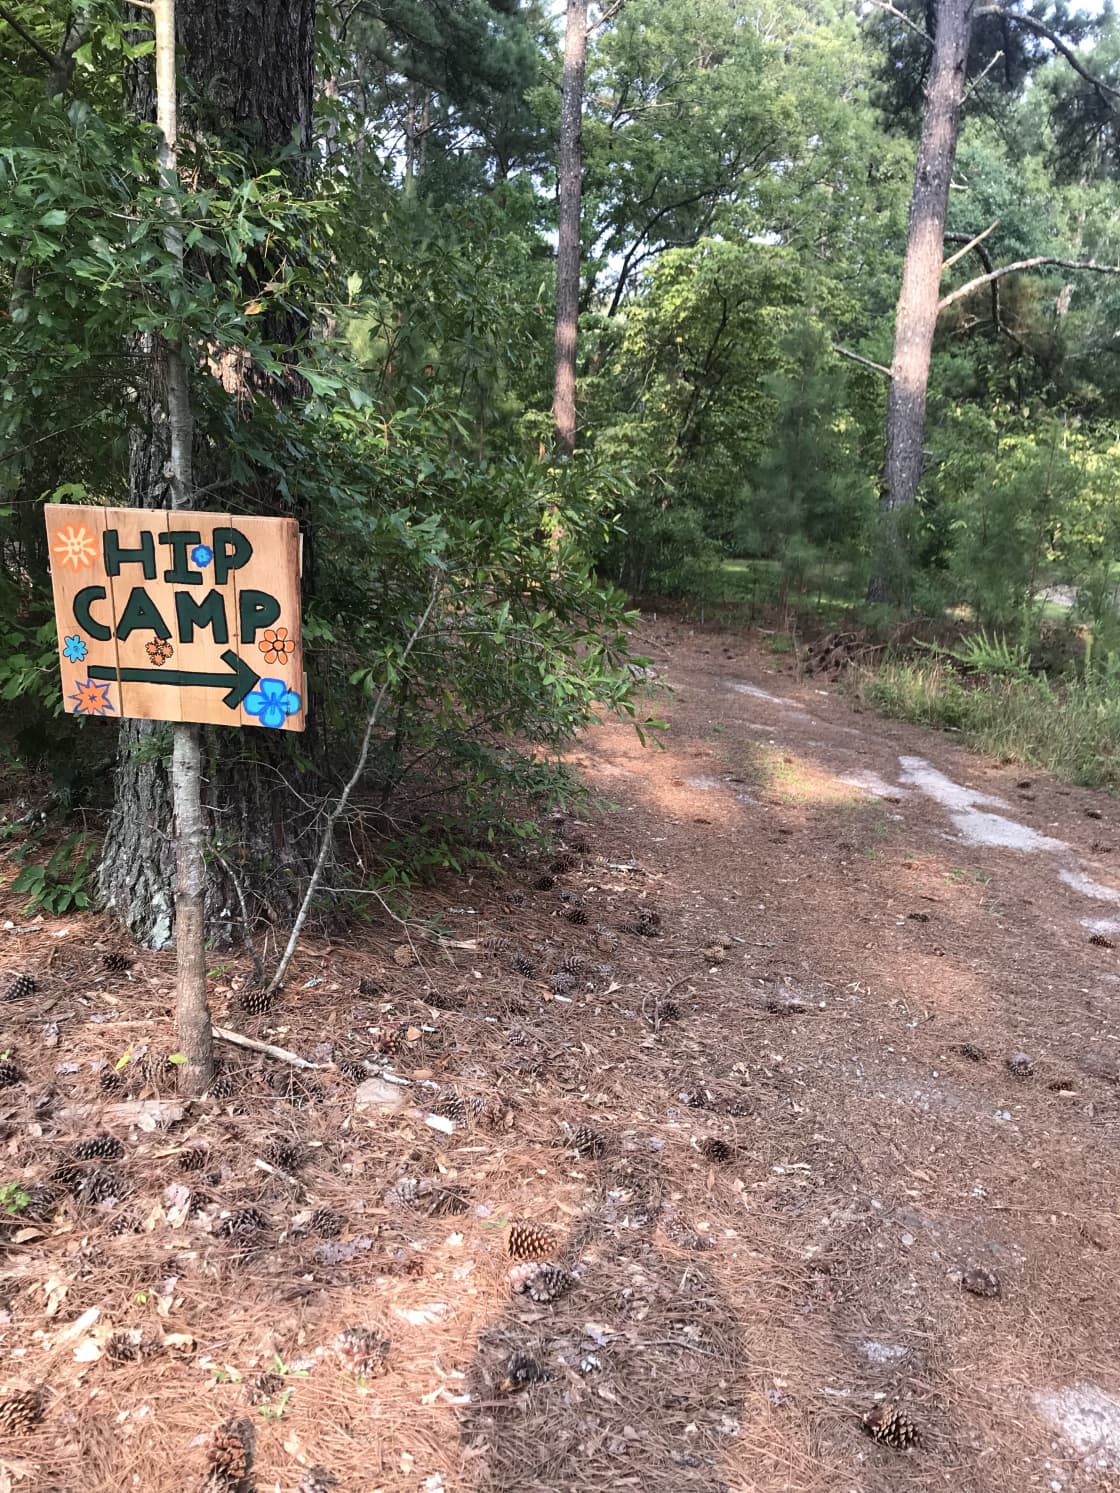 Take this road to camp